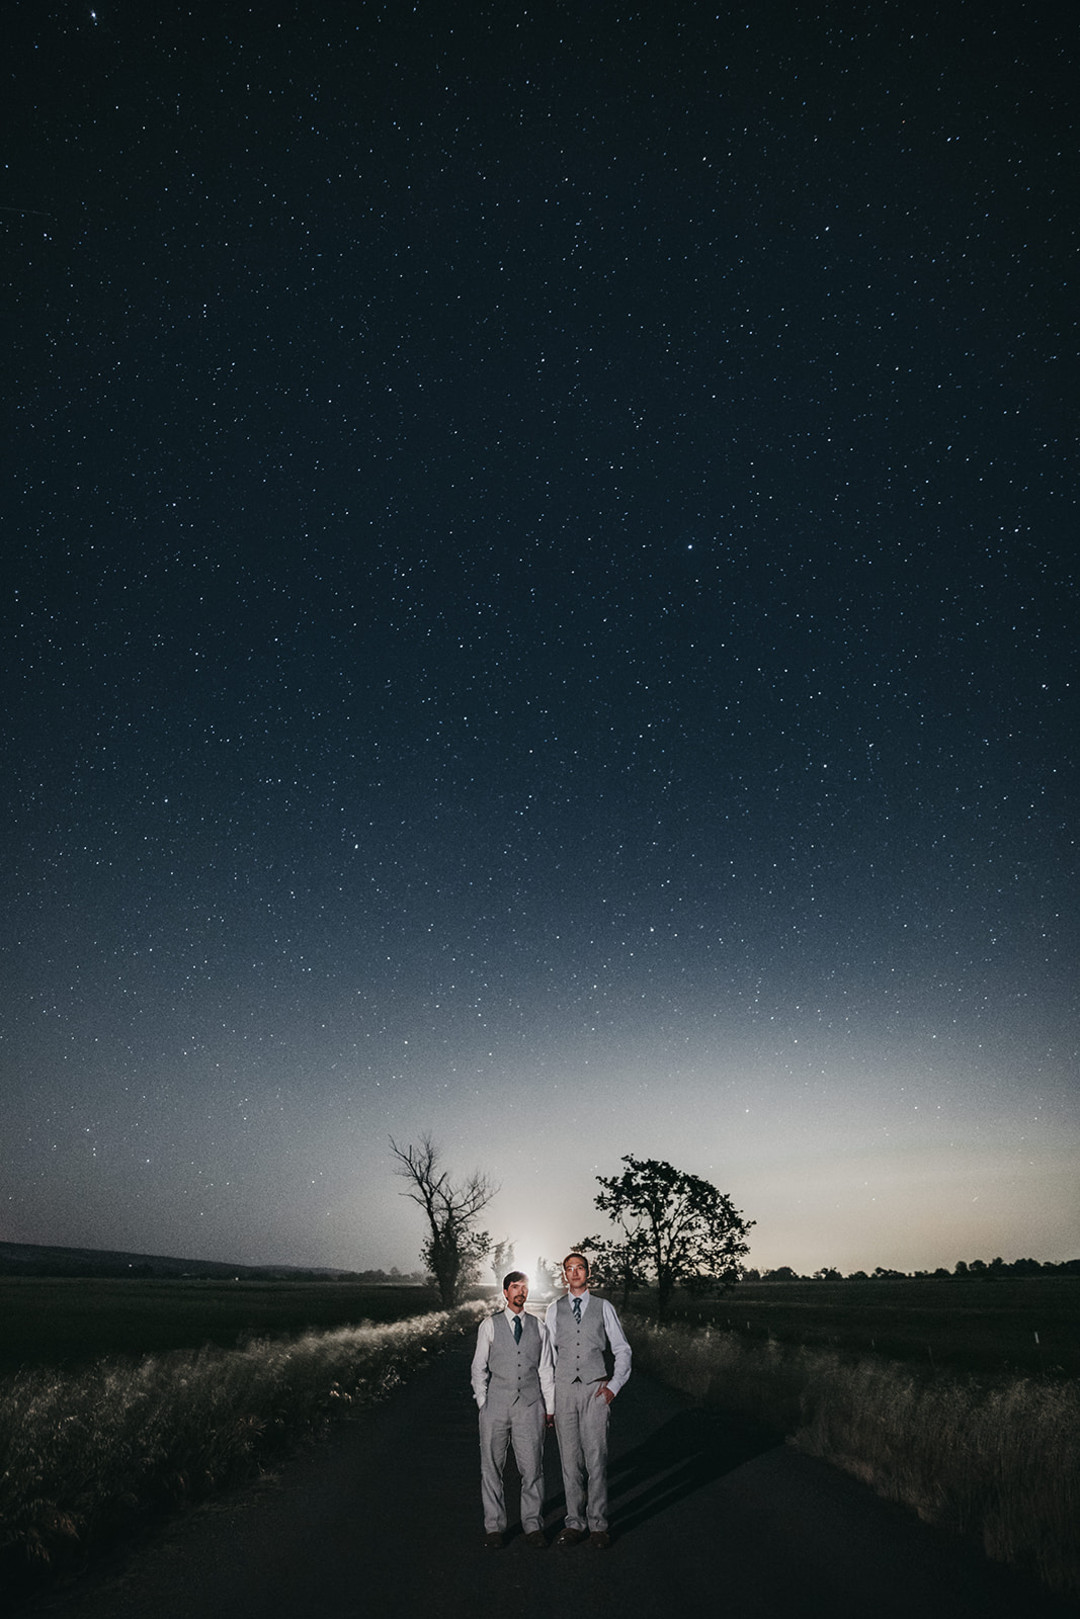 Rustic countryside spring wedding at California Woods Nature Preserve LGBTQ+ weddings gay wedding two grooms moody photojournalist nature meteor shower stars night sky